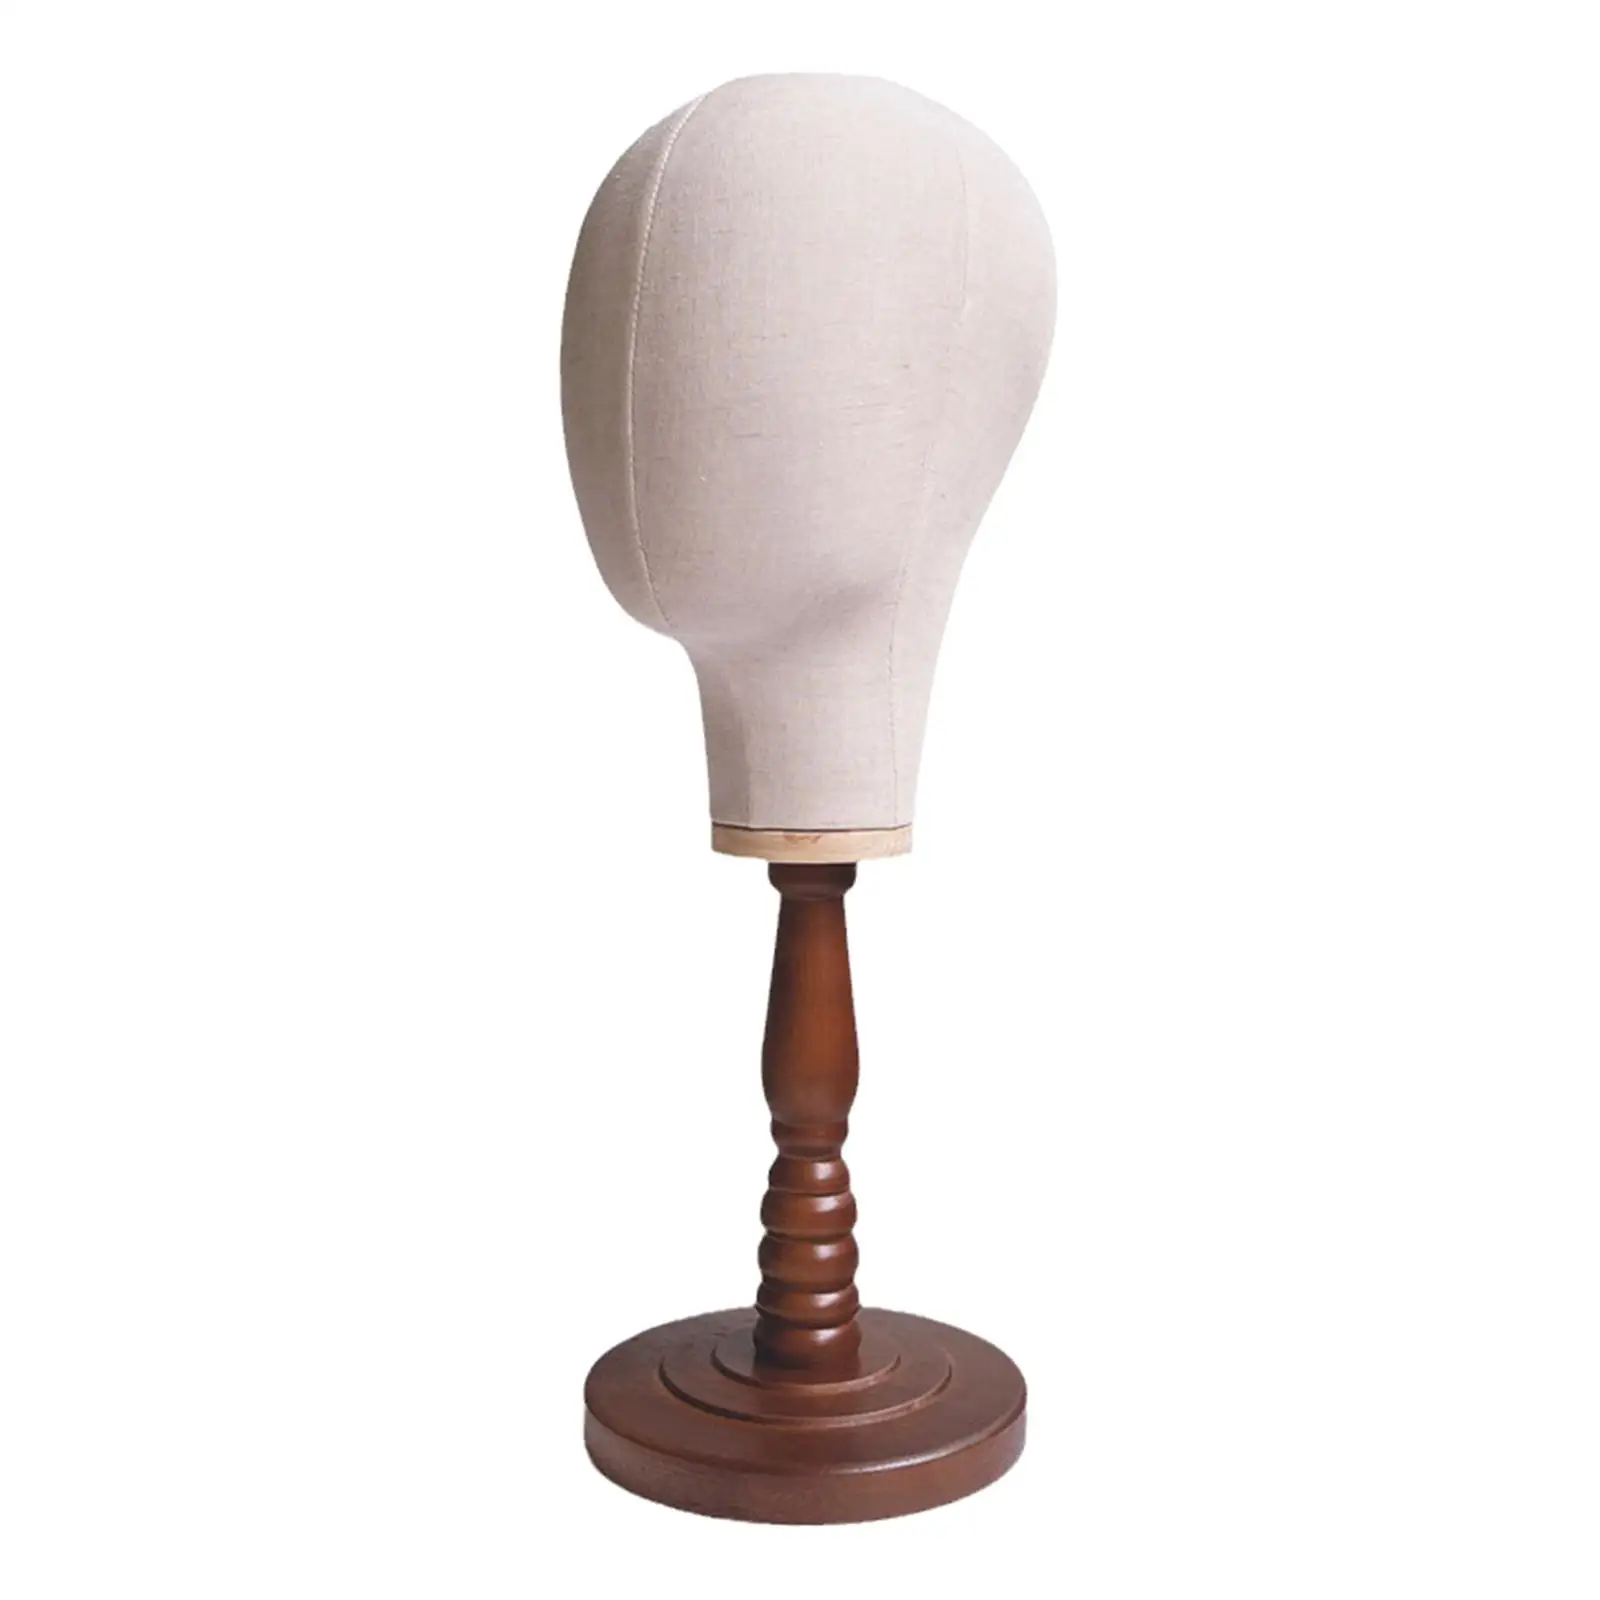 Hat Head Display Tabletop Manikin Head with Wood Base for Home Salon Hairdresser Training Styling Drying Beginner Stylist